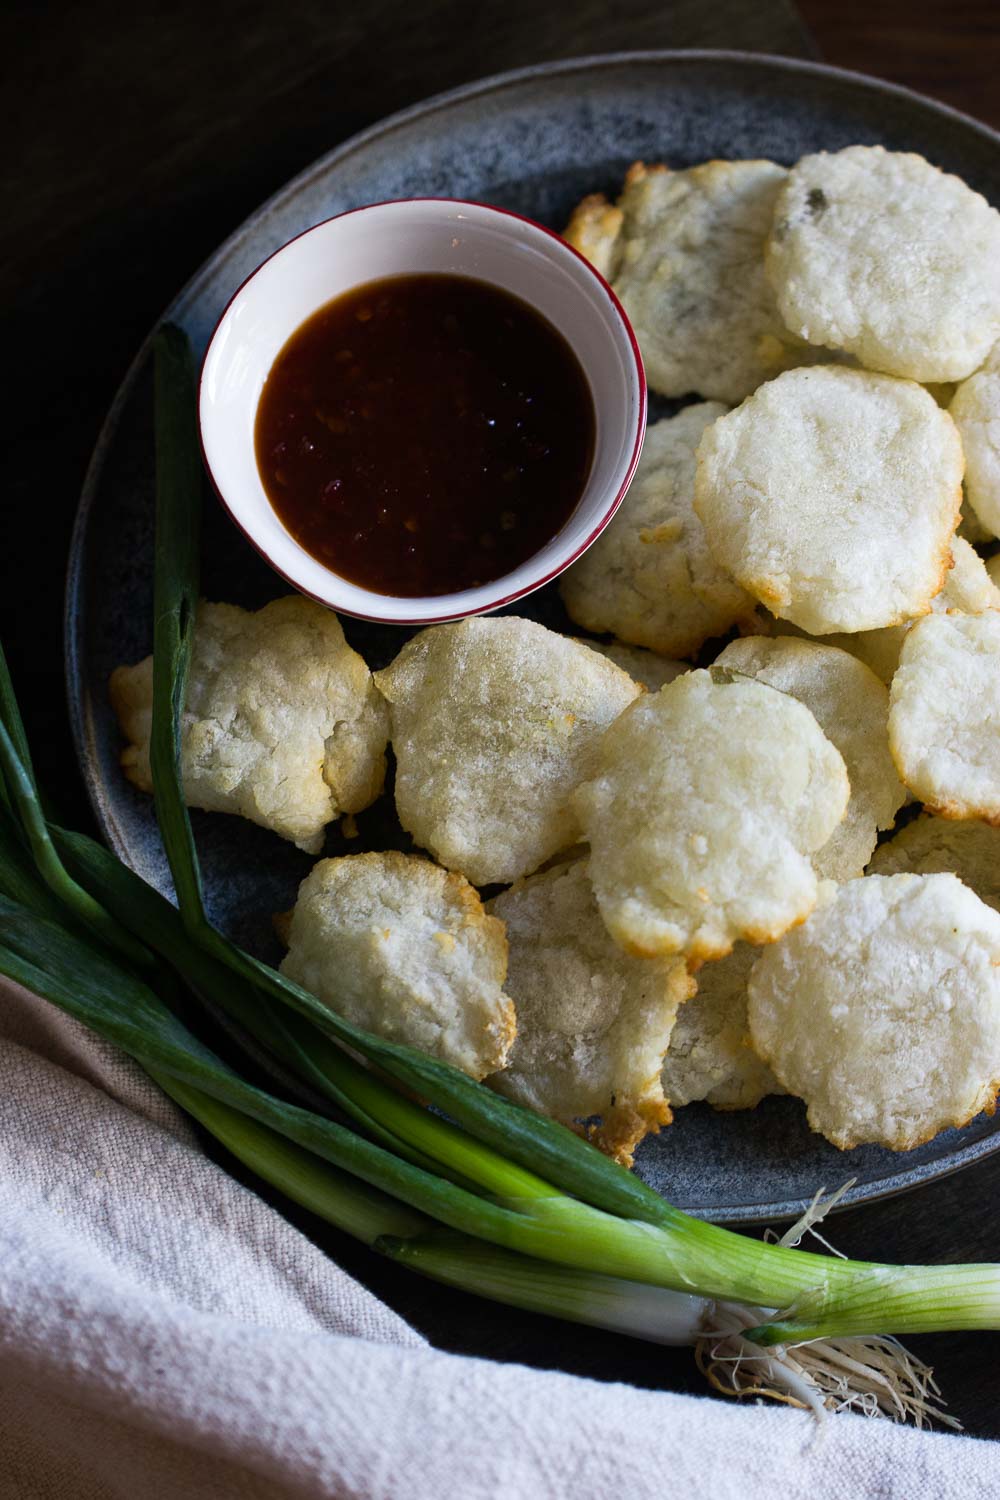 This crispy and delicious rujak cireng or fried tapioca flour is a popular Indonesian street food snack made with tapioca flour and served with rujak sauce. They freeze well and you can fry them in an air fryer. Moreover, they're a crowd pleaser!